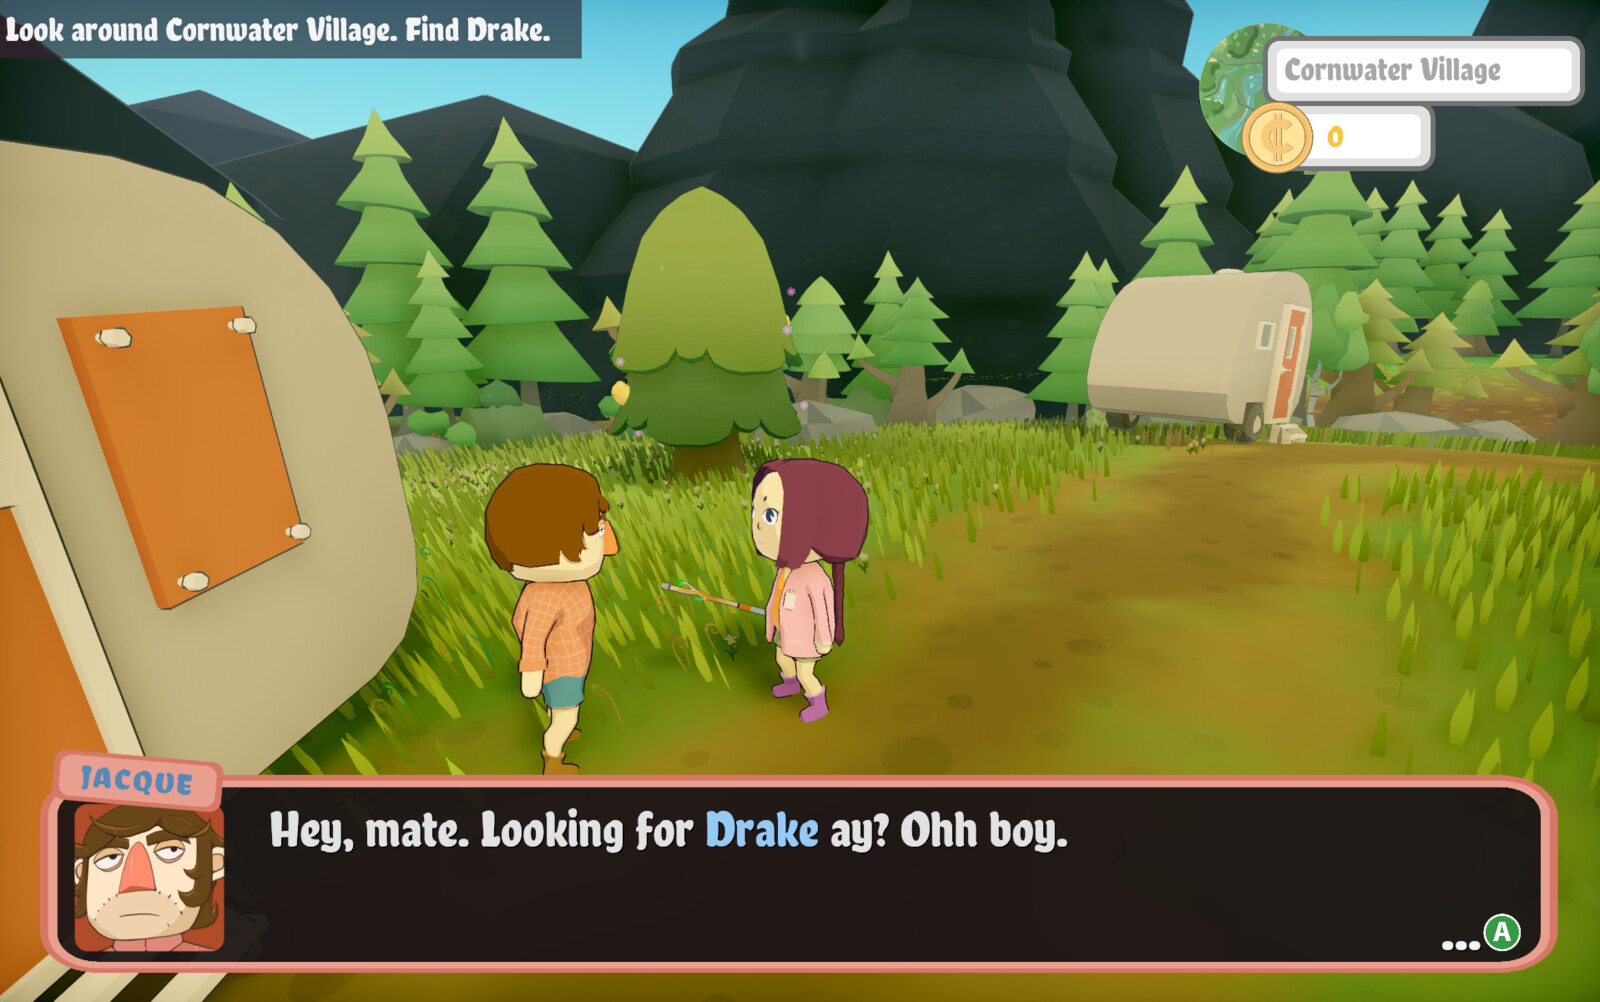 Dialogue screen in game